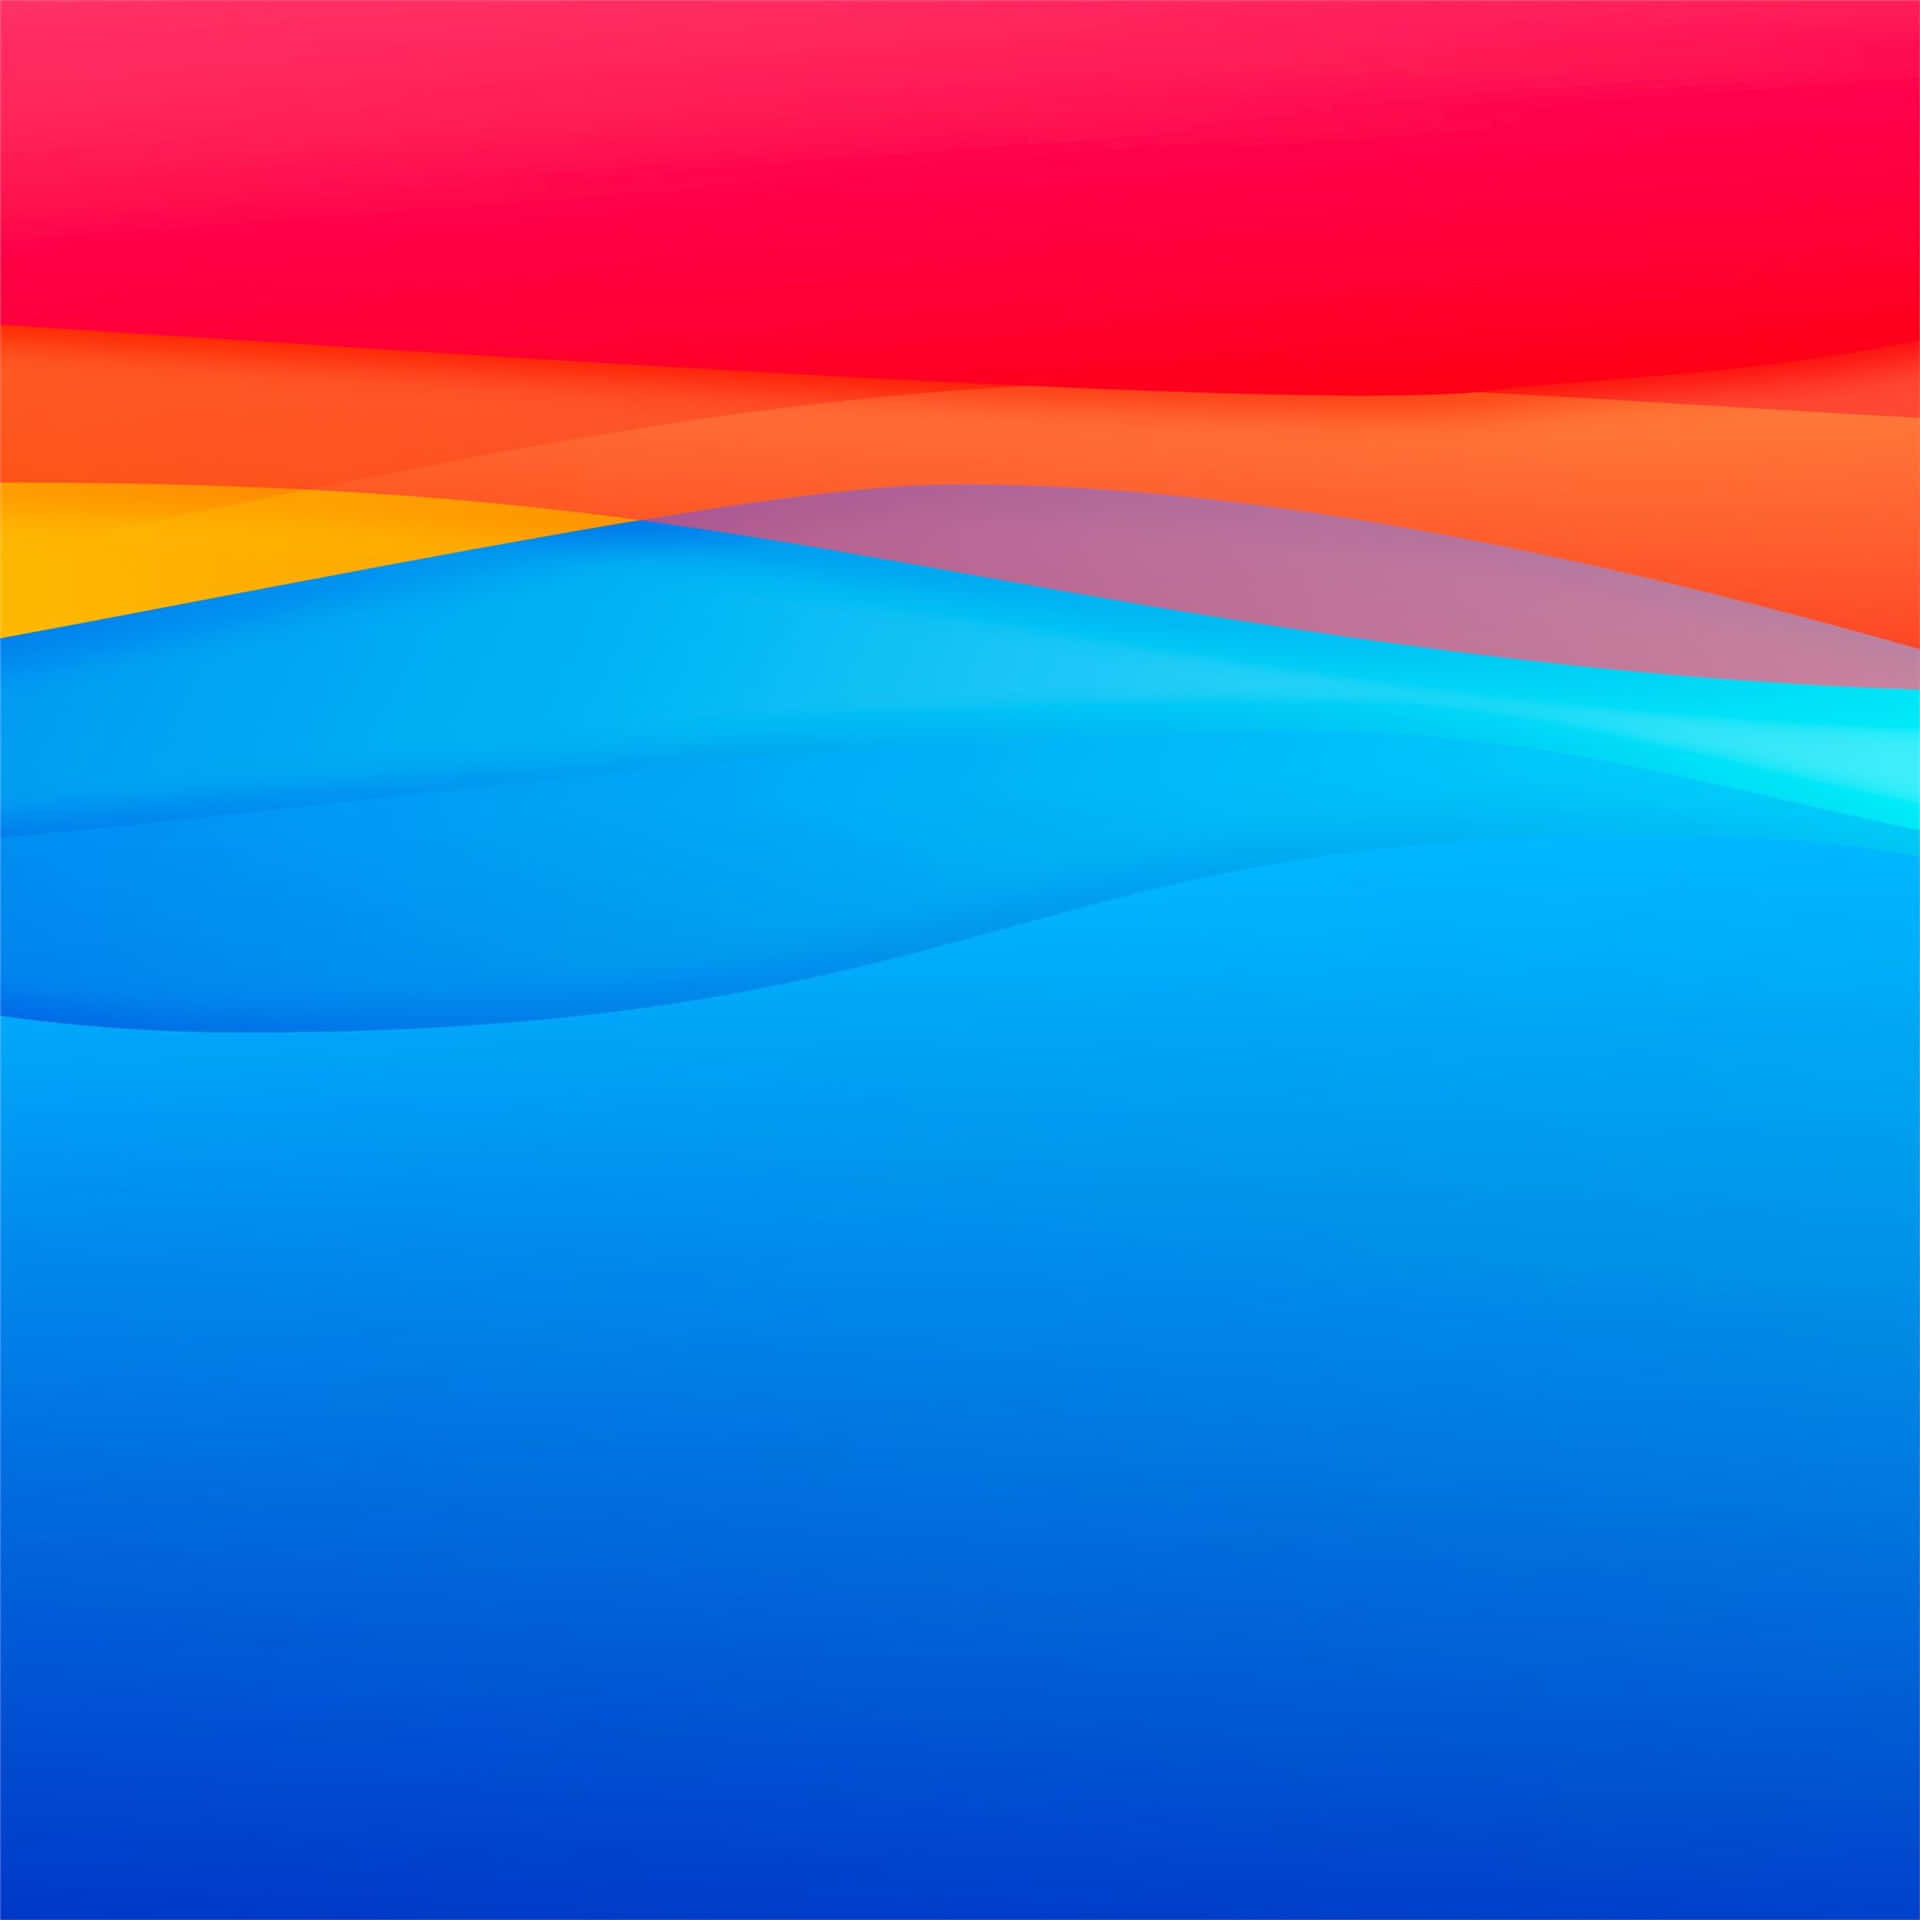 A vibrant blend of orange and blue merging in harmony. Wallpaper